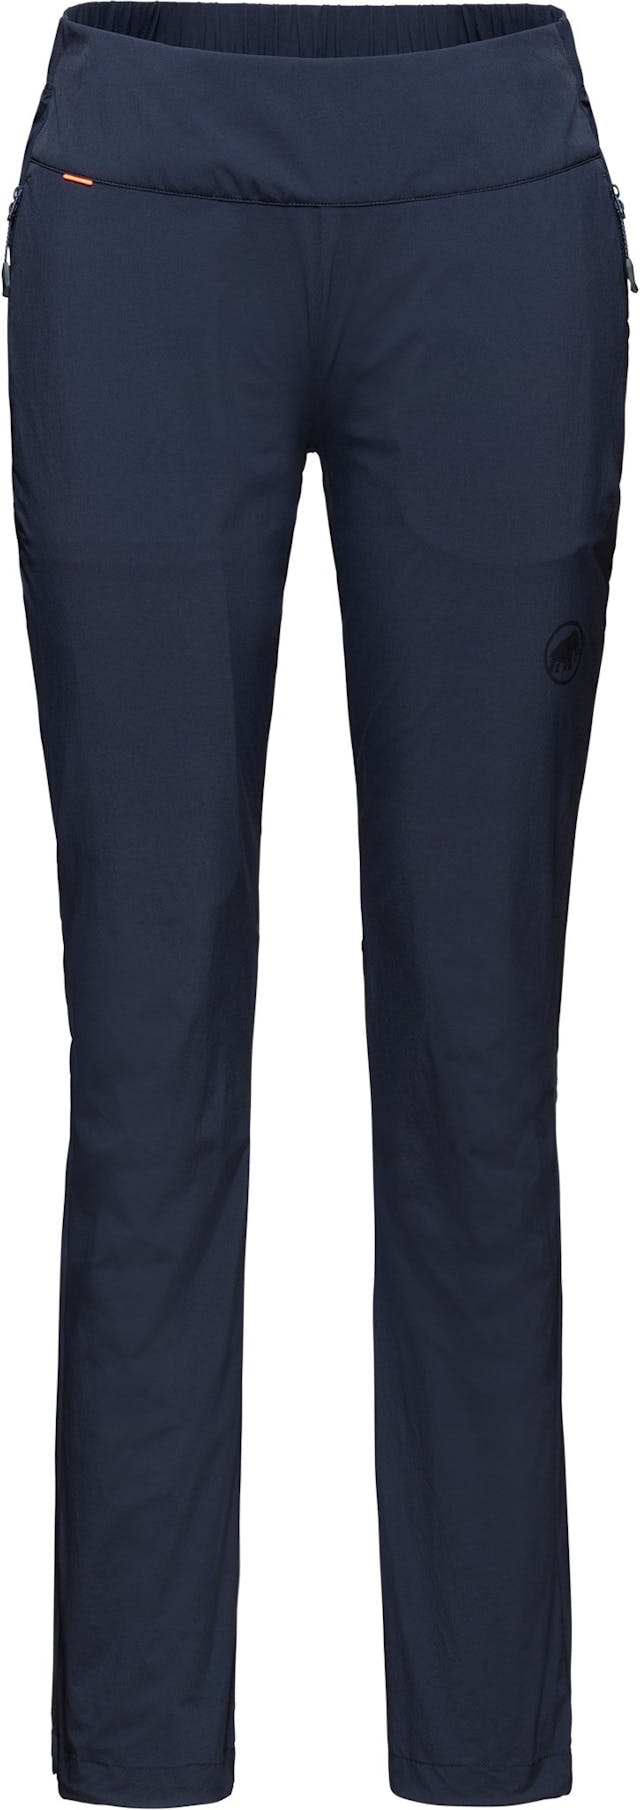 Product image for Runbold Light Pants - Women's